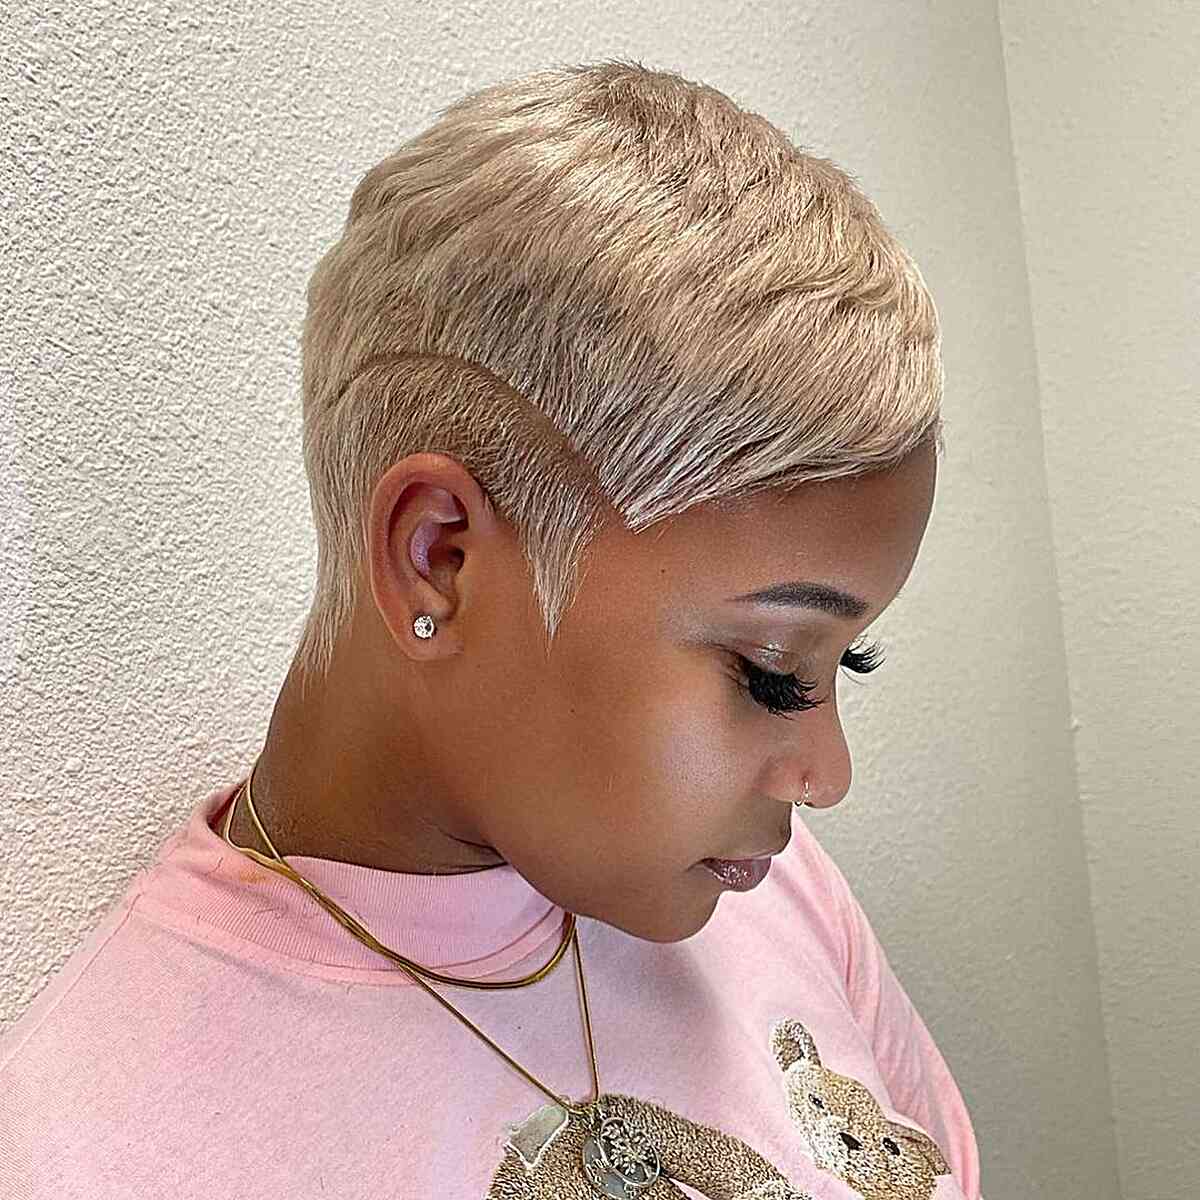 Galaxy/Afro Hair Cut Styles for Ladies - 30 Trending Low Cuts -